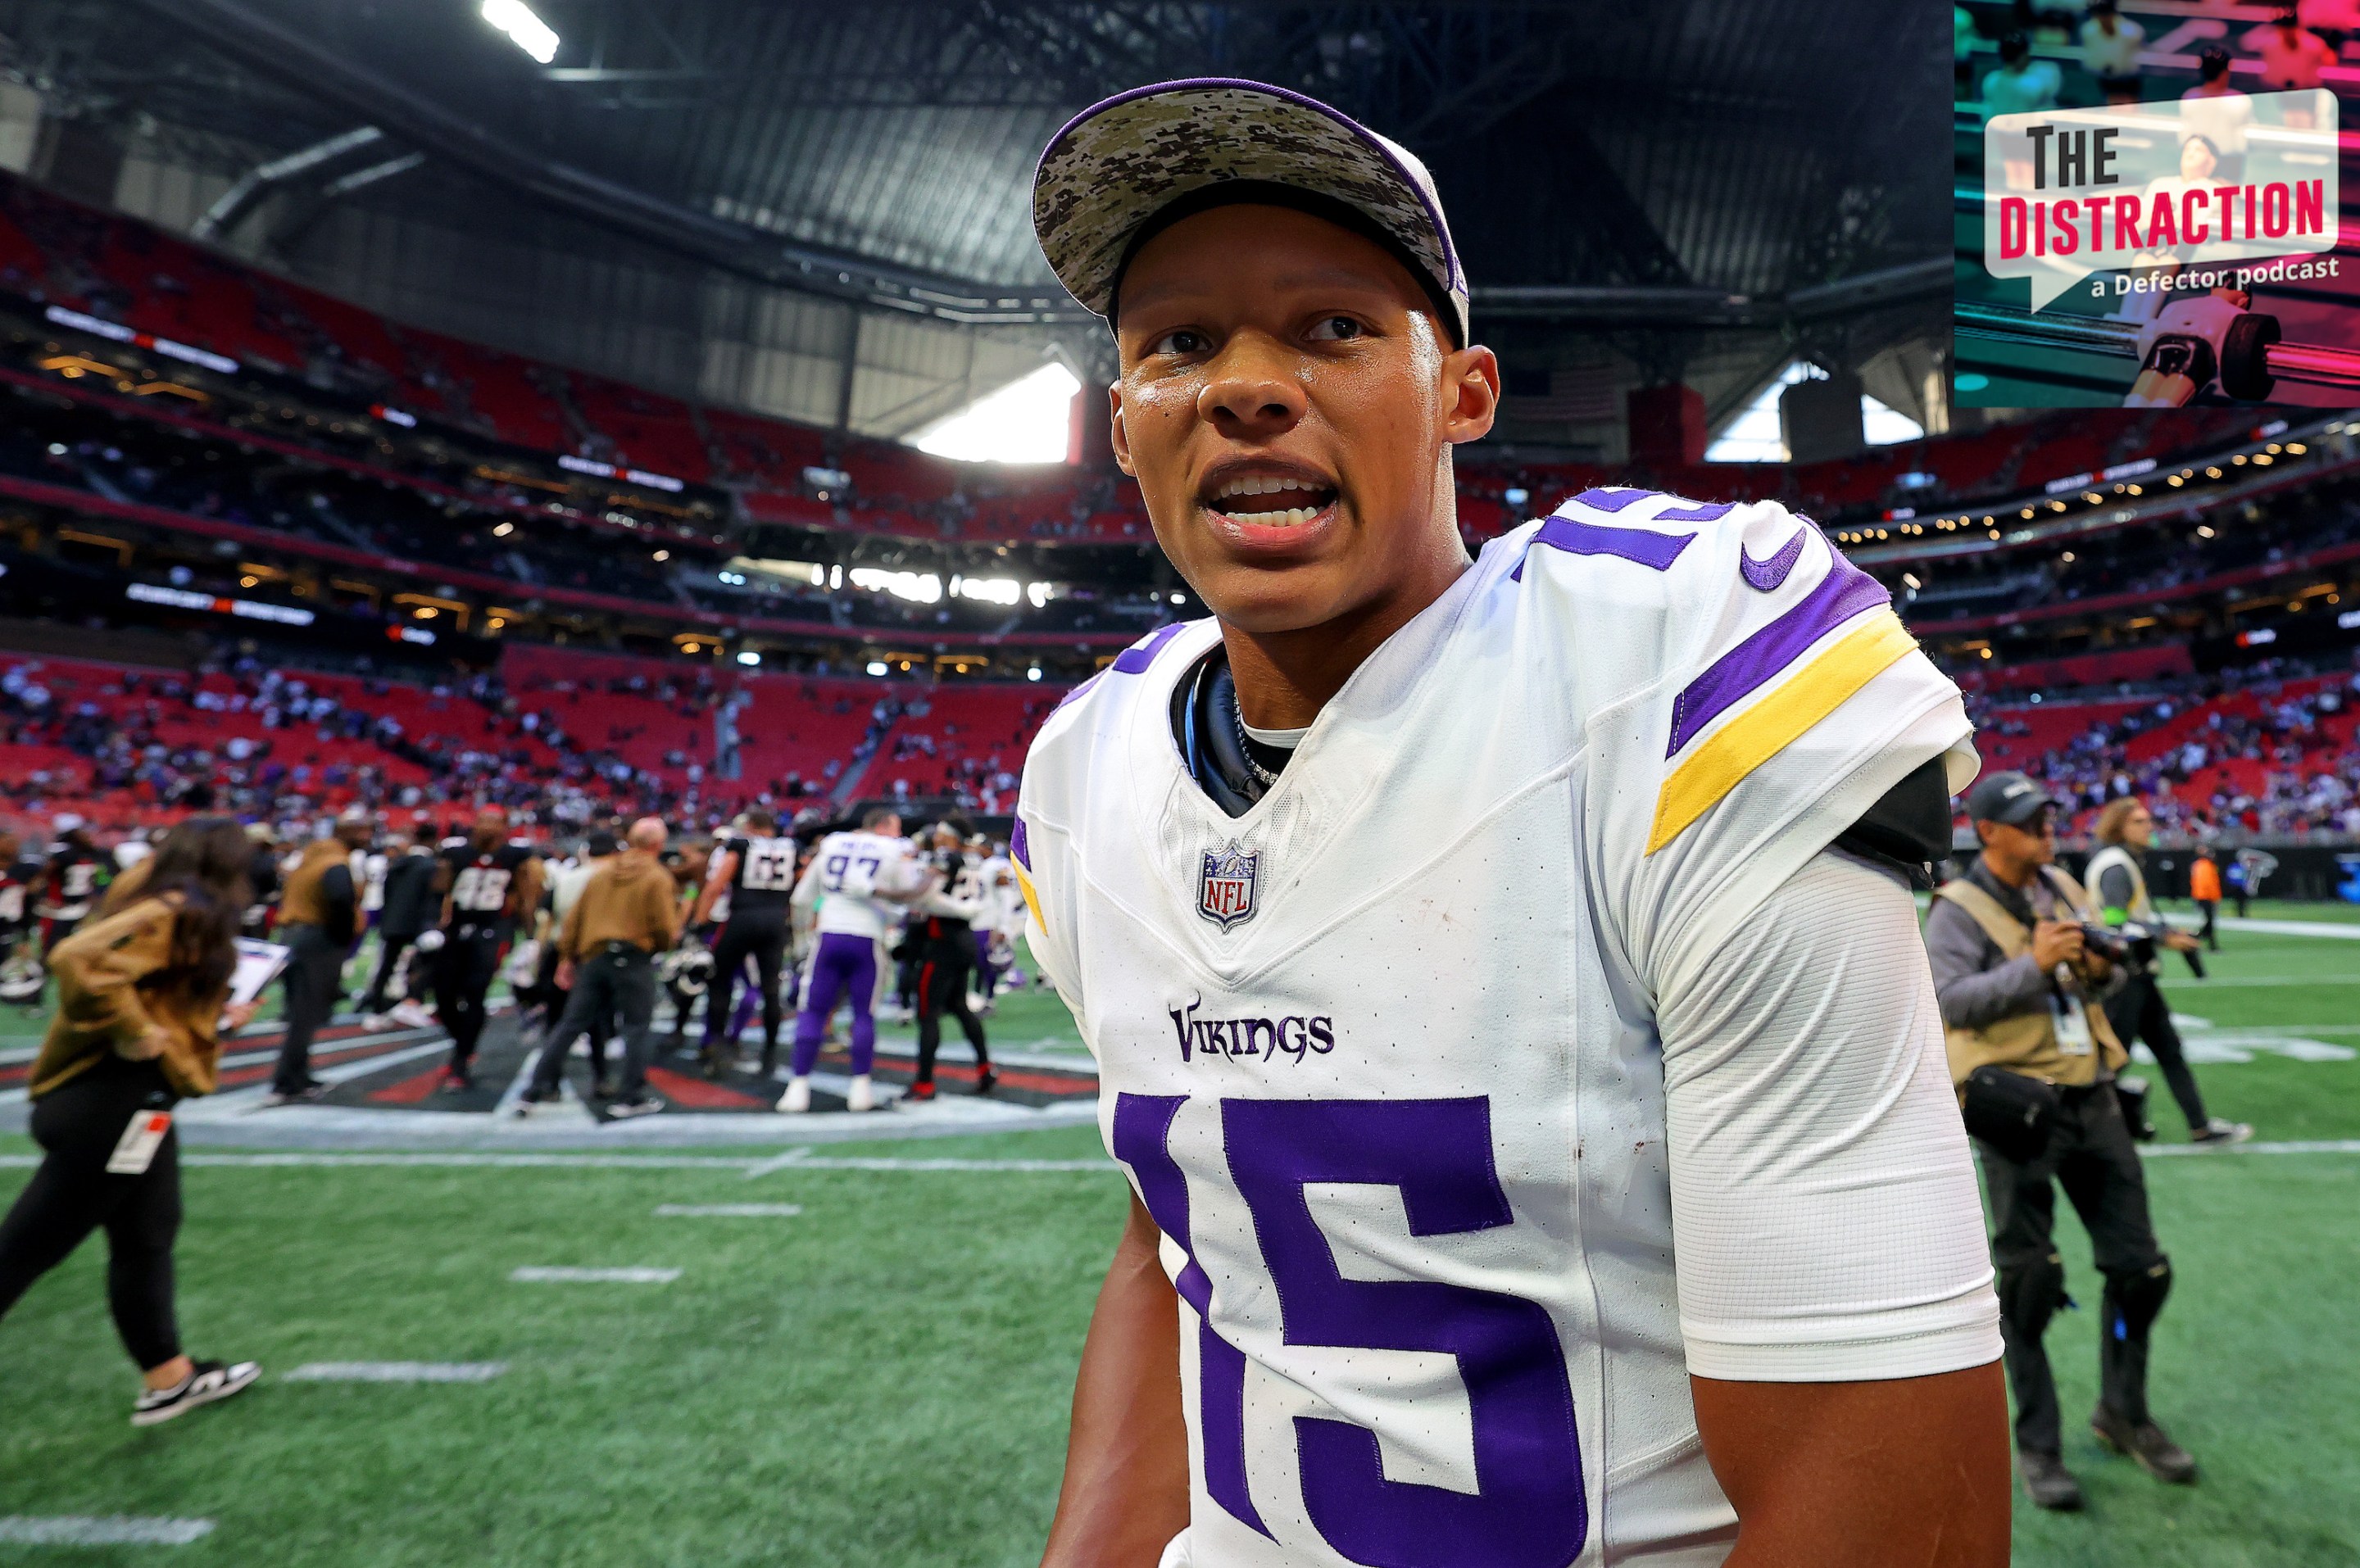 New Vikings quarterback Joshua Dobbs exults after leading his team to a comeback win against the Falcons in Atlanta.